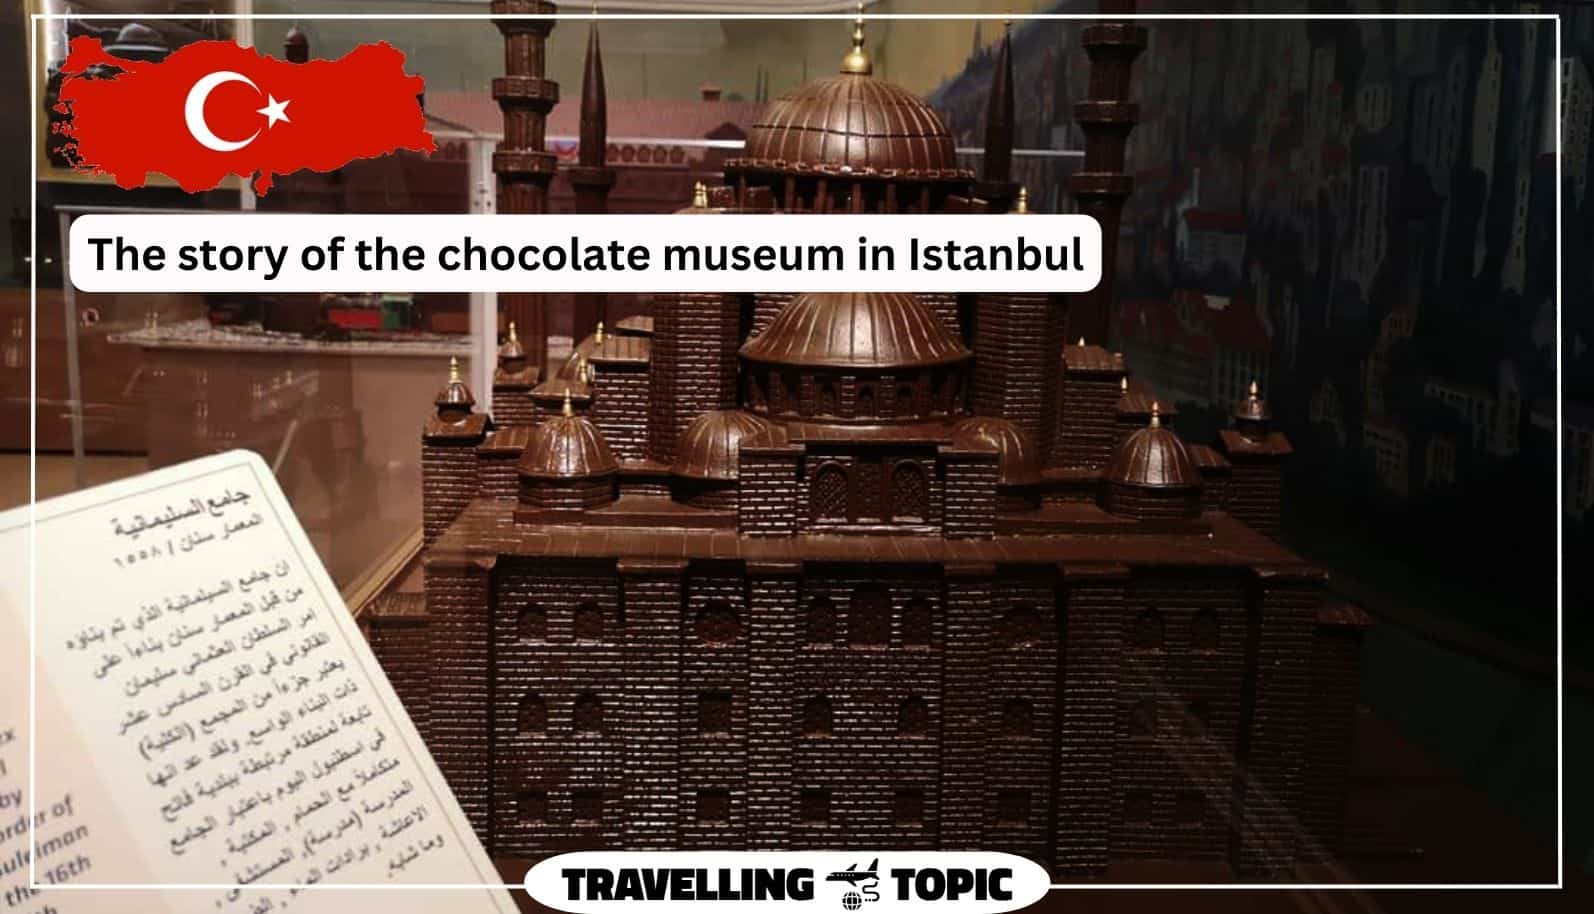 The story of the chocolate museum in Istanbul